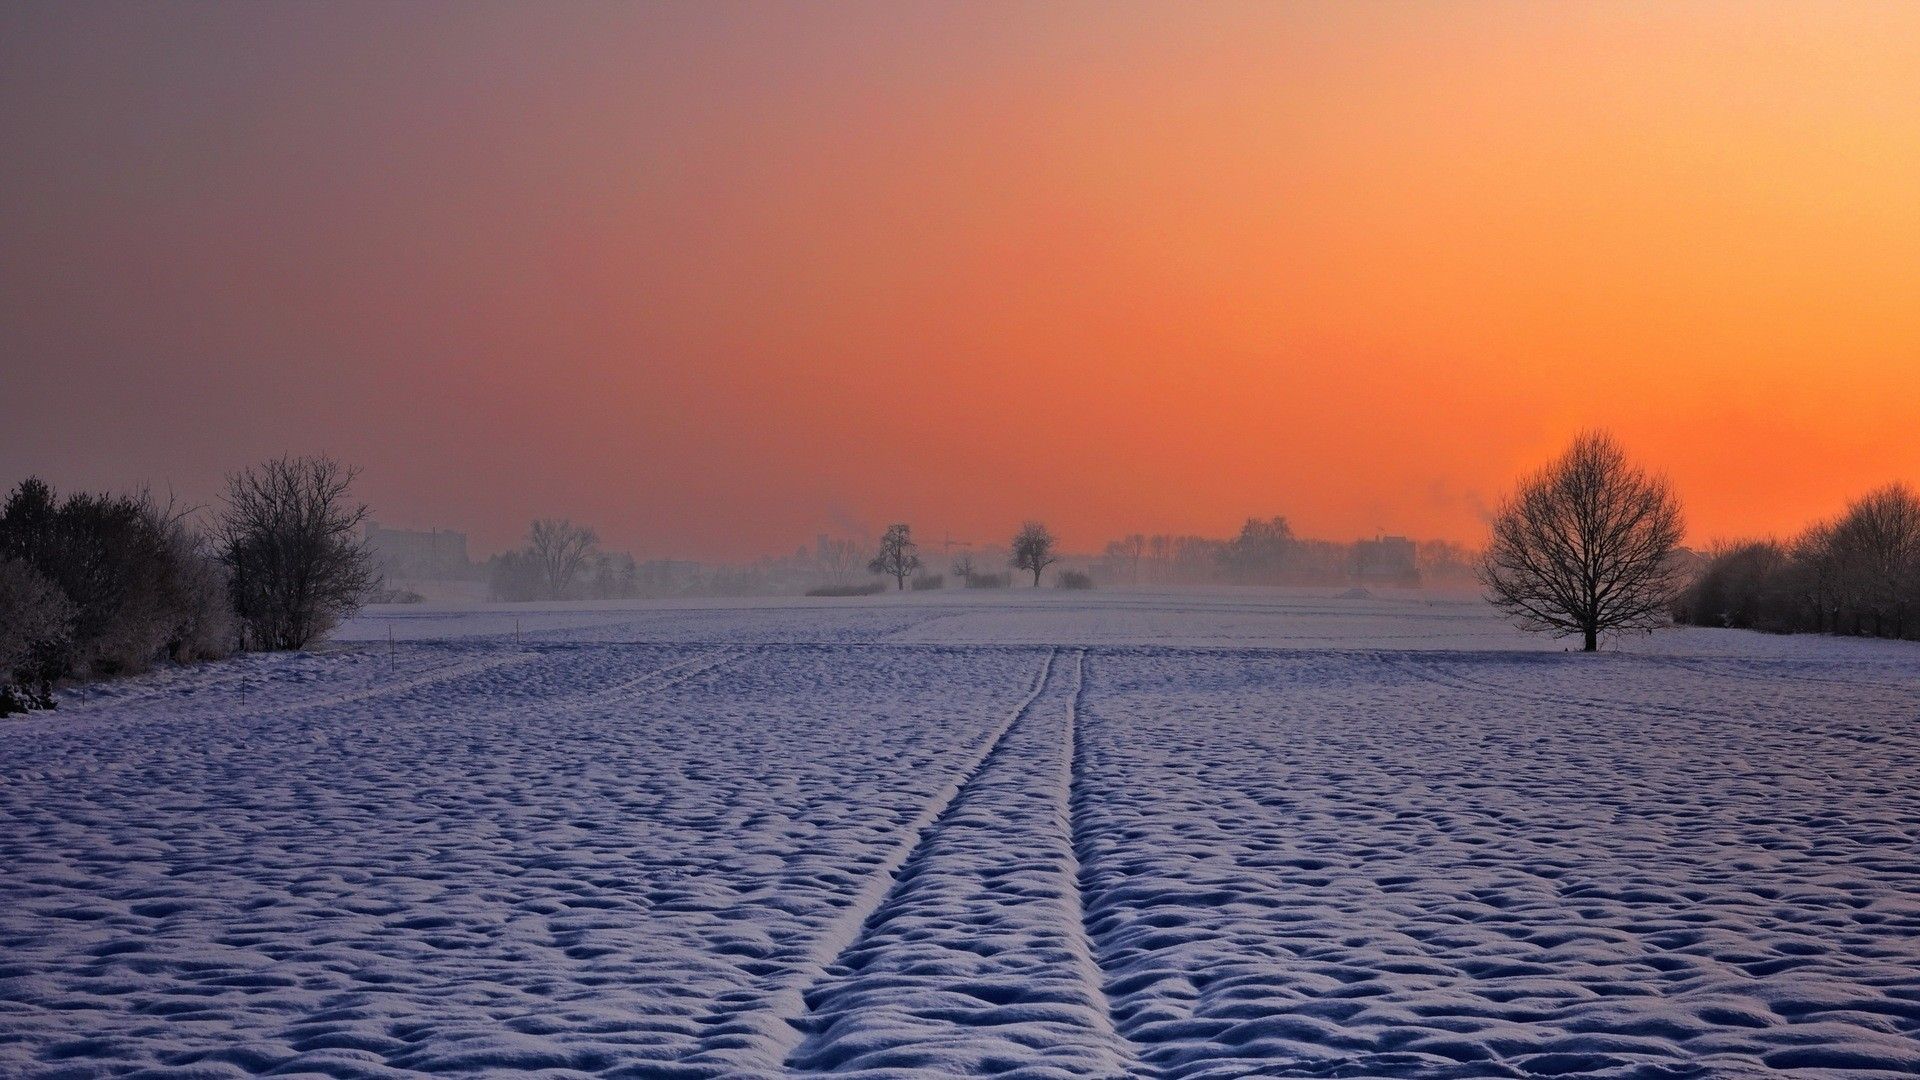 Meadow in winter at sunset wallpaper. Winter scenery, Sunset picture, Winter image